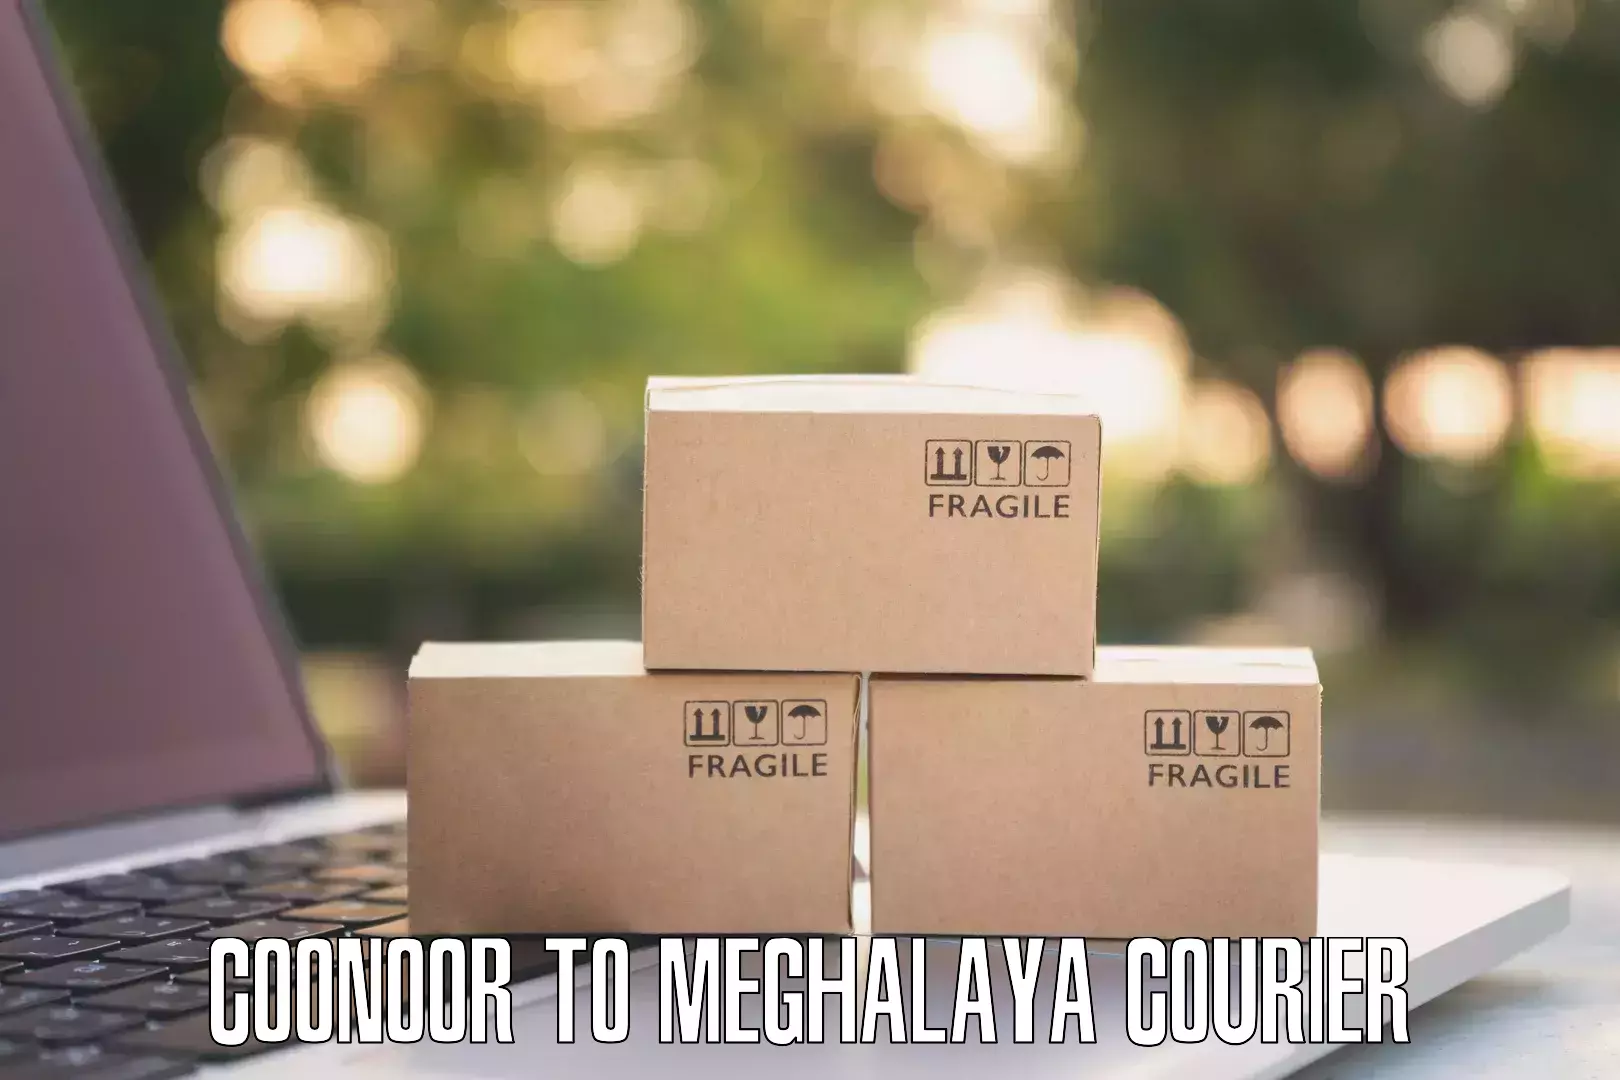 Express courier facilities in Coonoor to Meghalaya